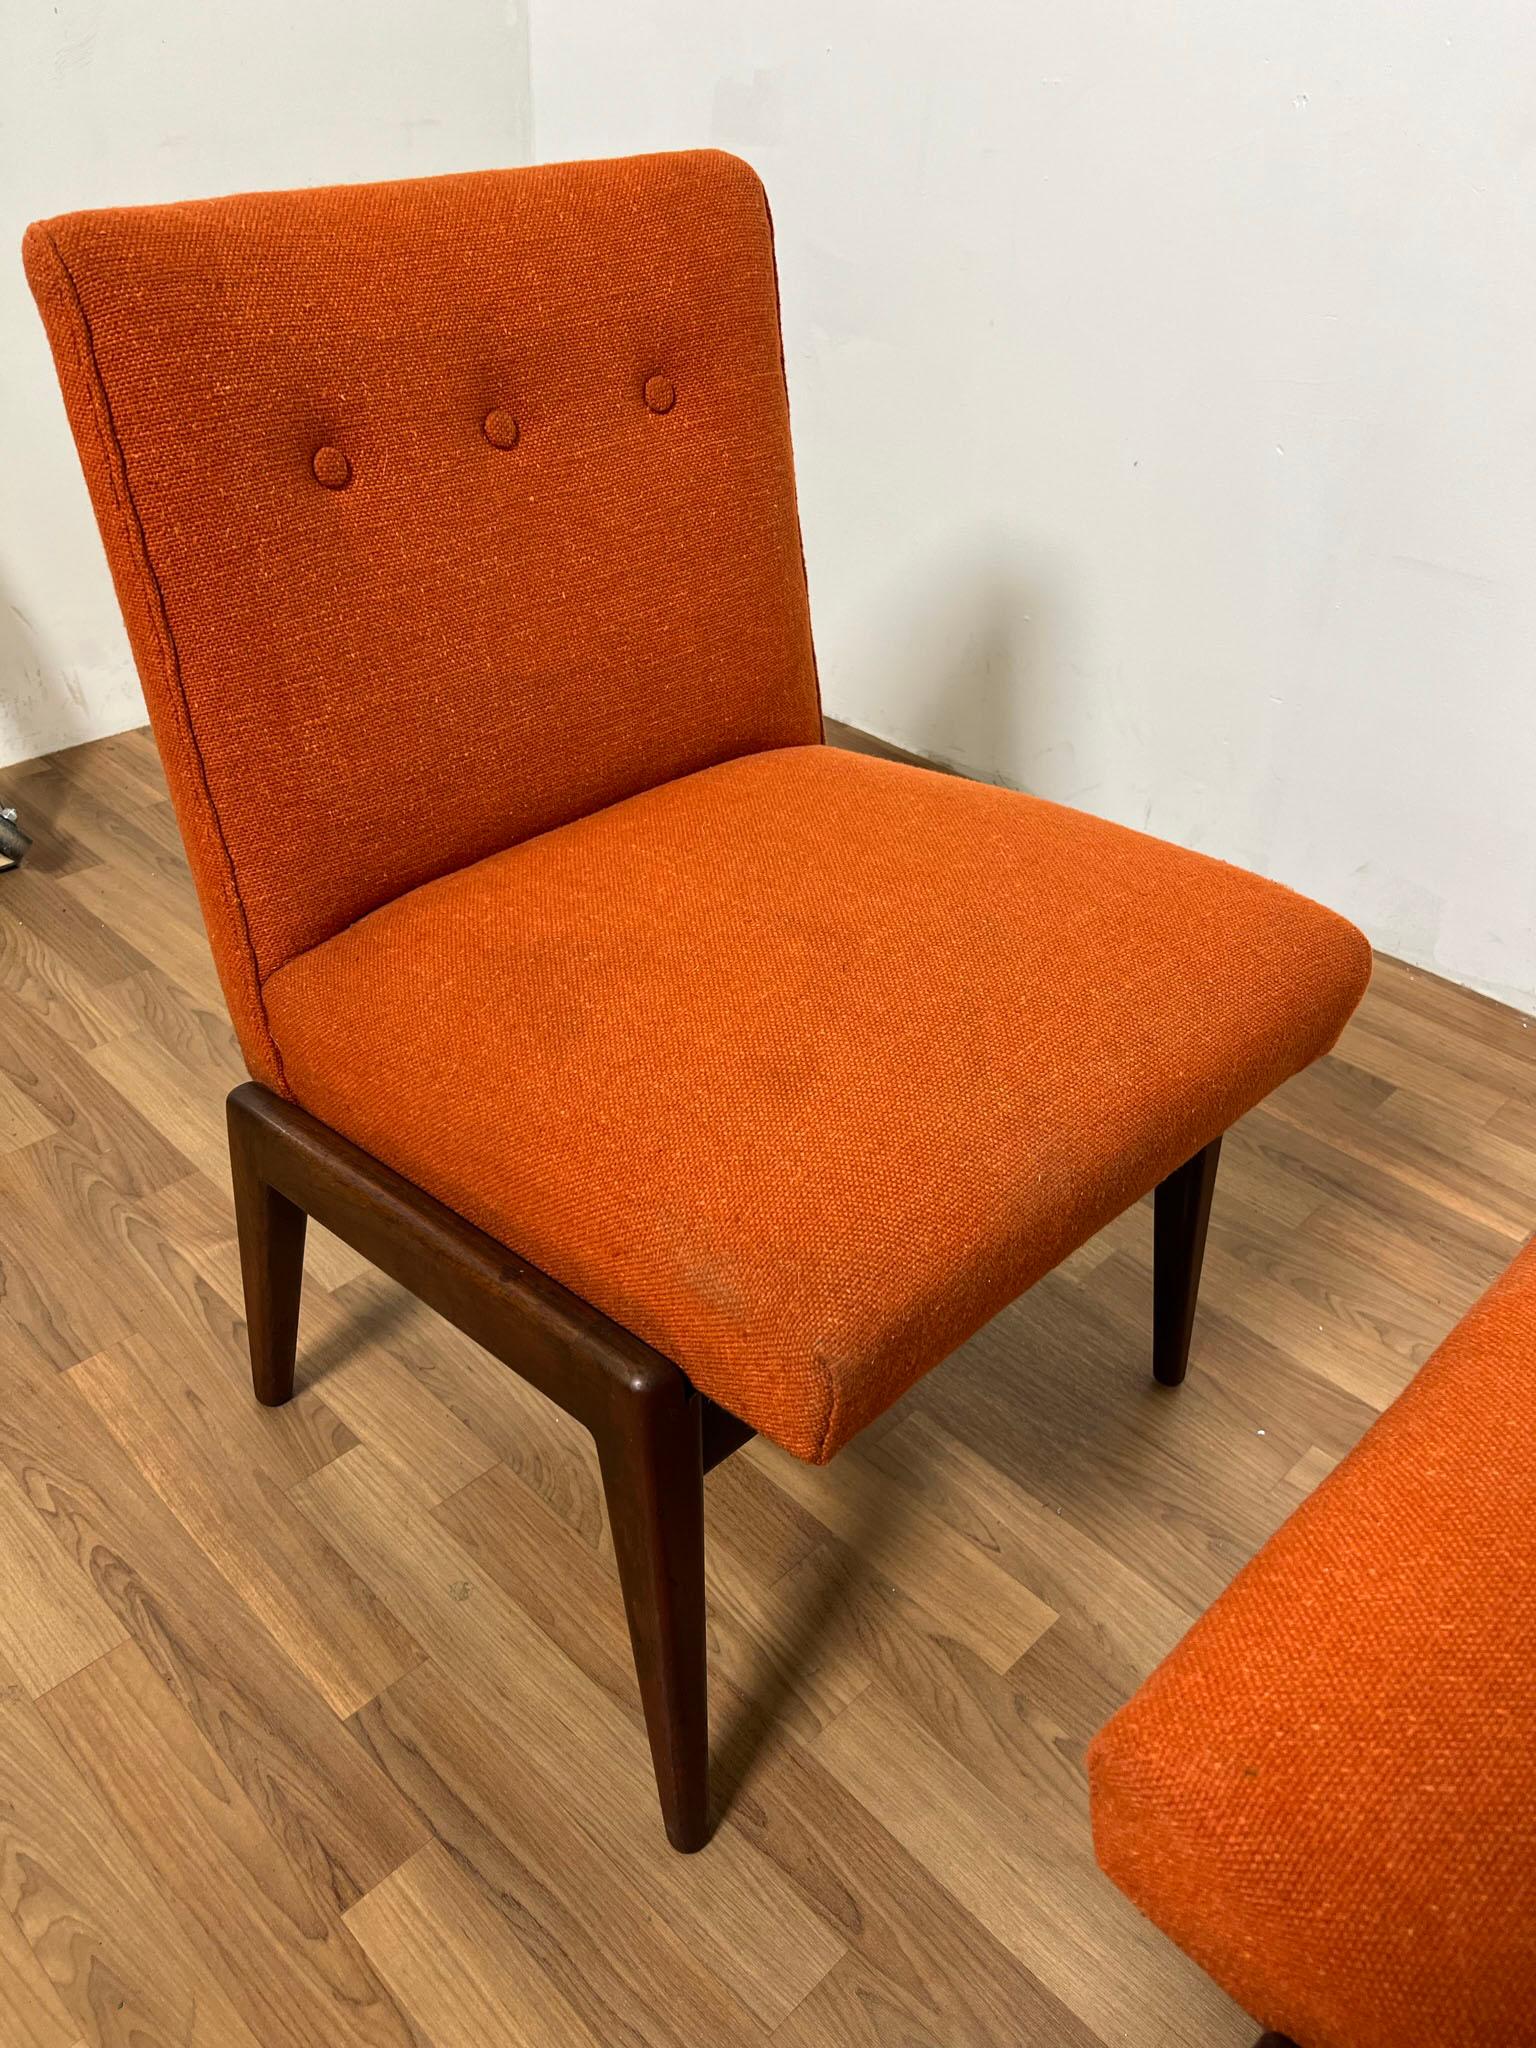 Pair of Jens Risom C-220 Lounge Chairs Circa 1950s In Good Condition For Sale In Peabody, MA